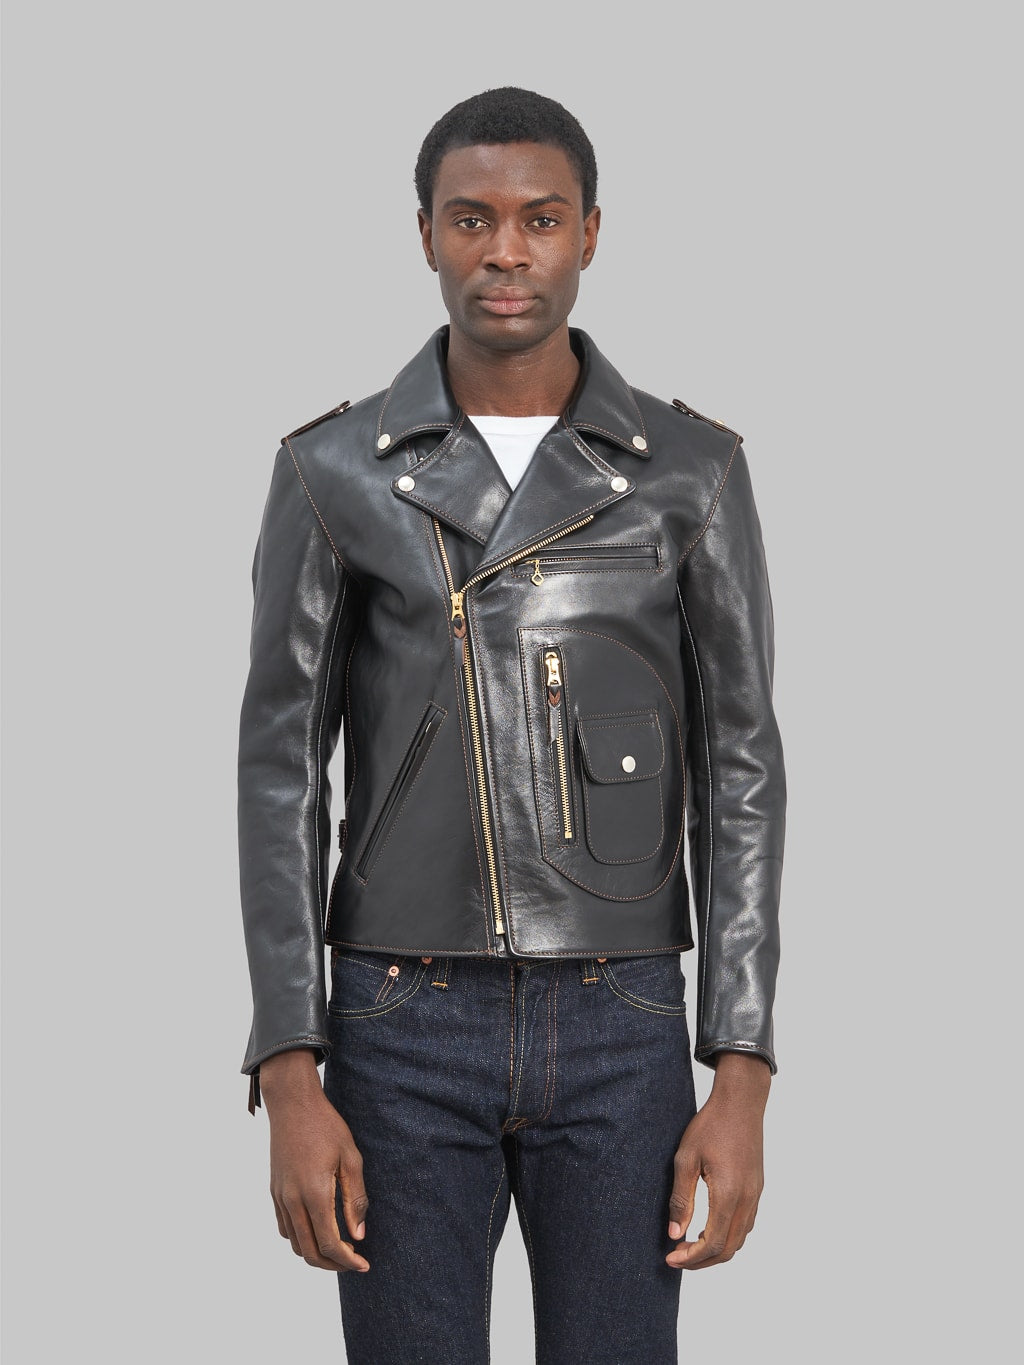 The Flat Head Horsehide leather double Riders Jacket Black Semi Aniline fit